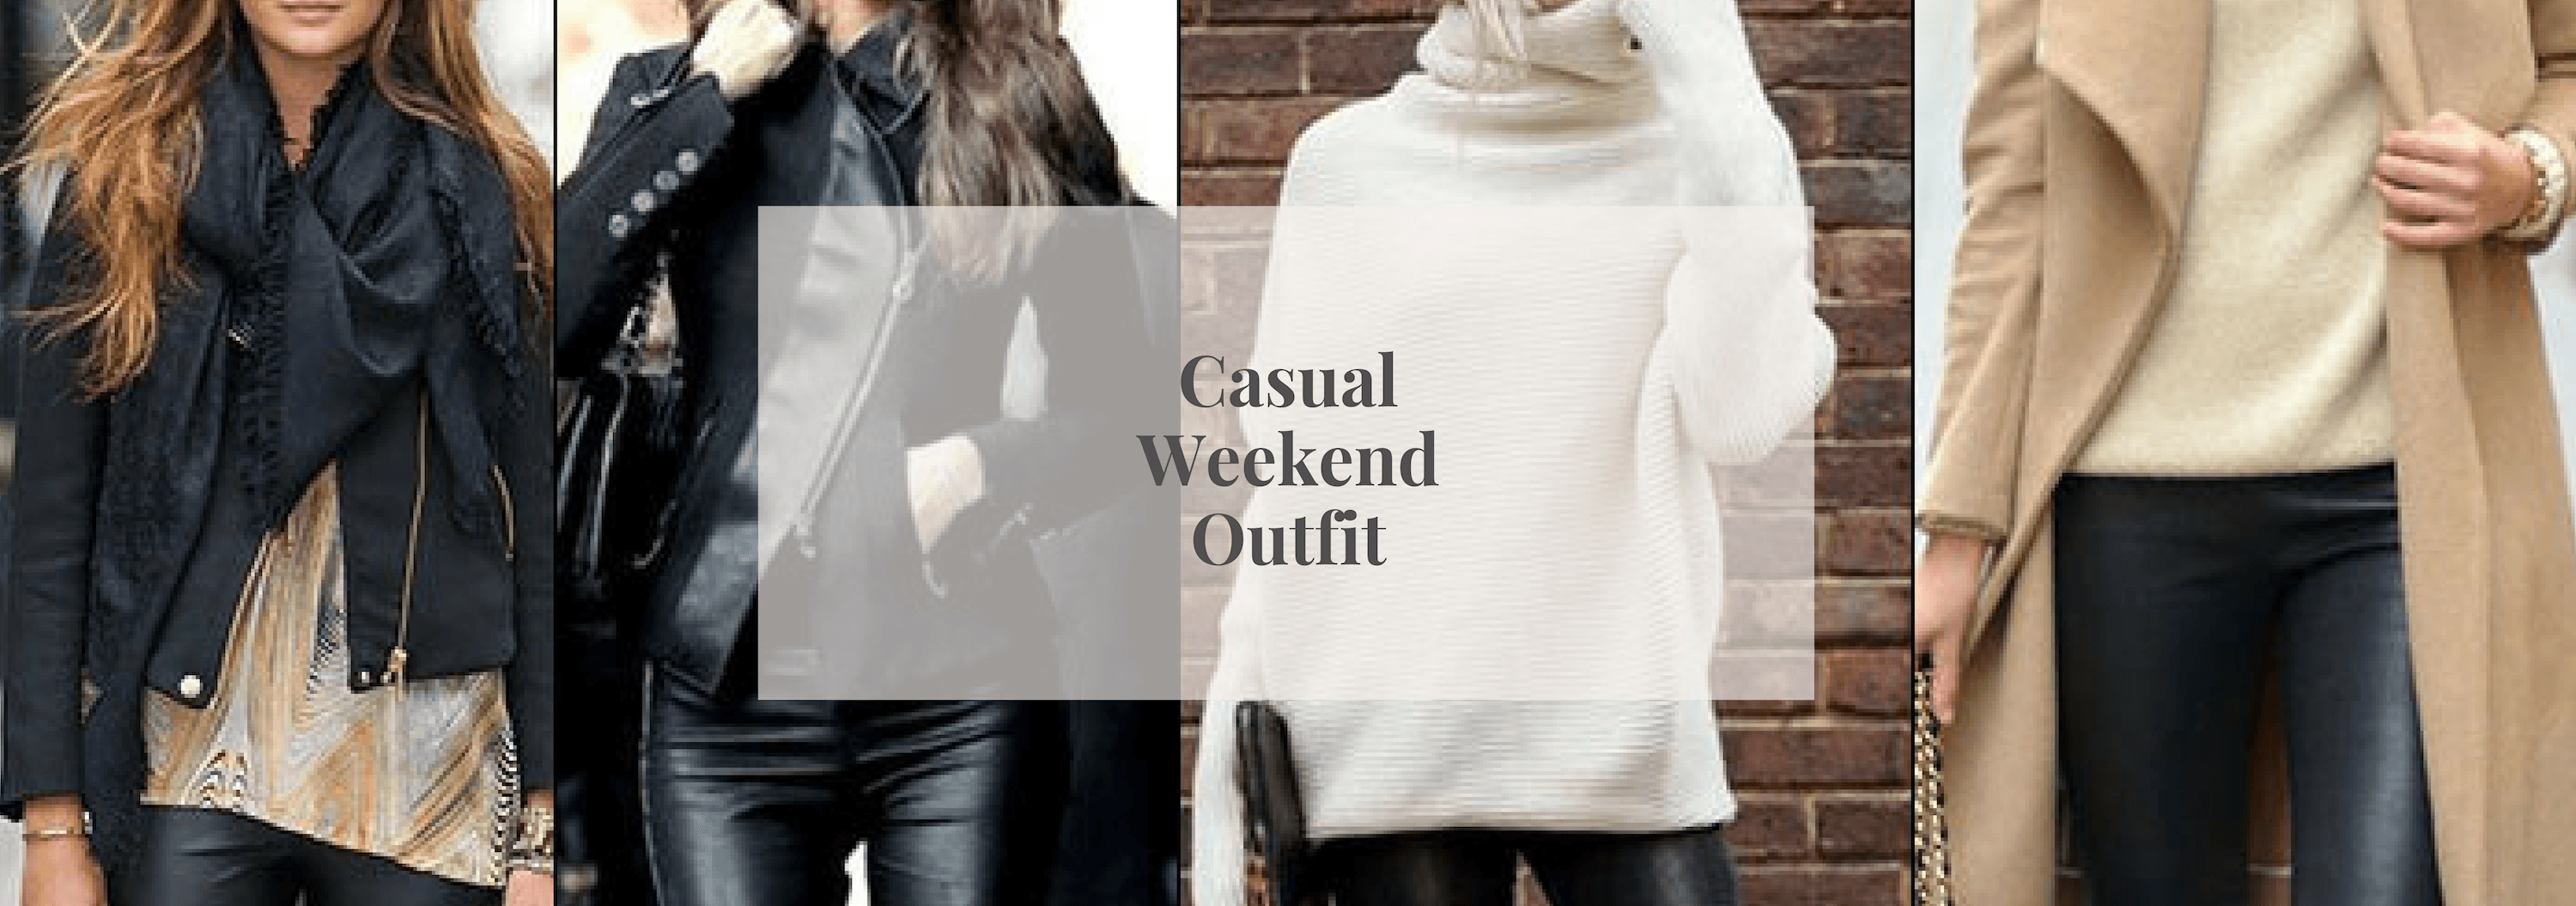 Casual Weekend Outfit - Numi